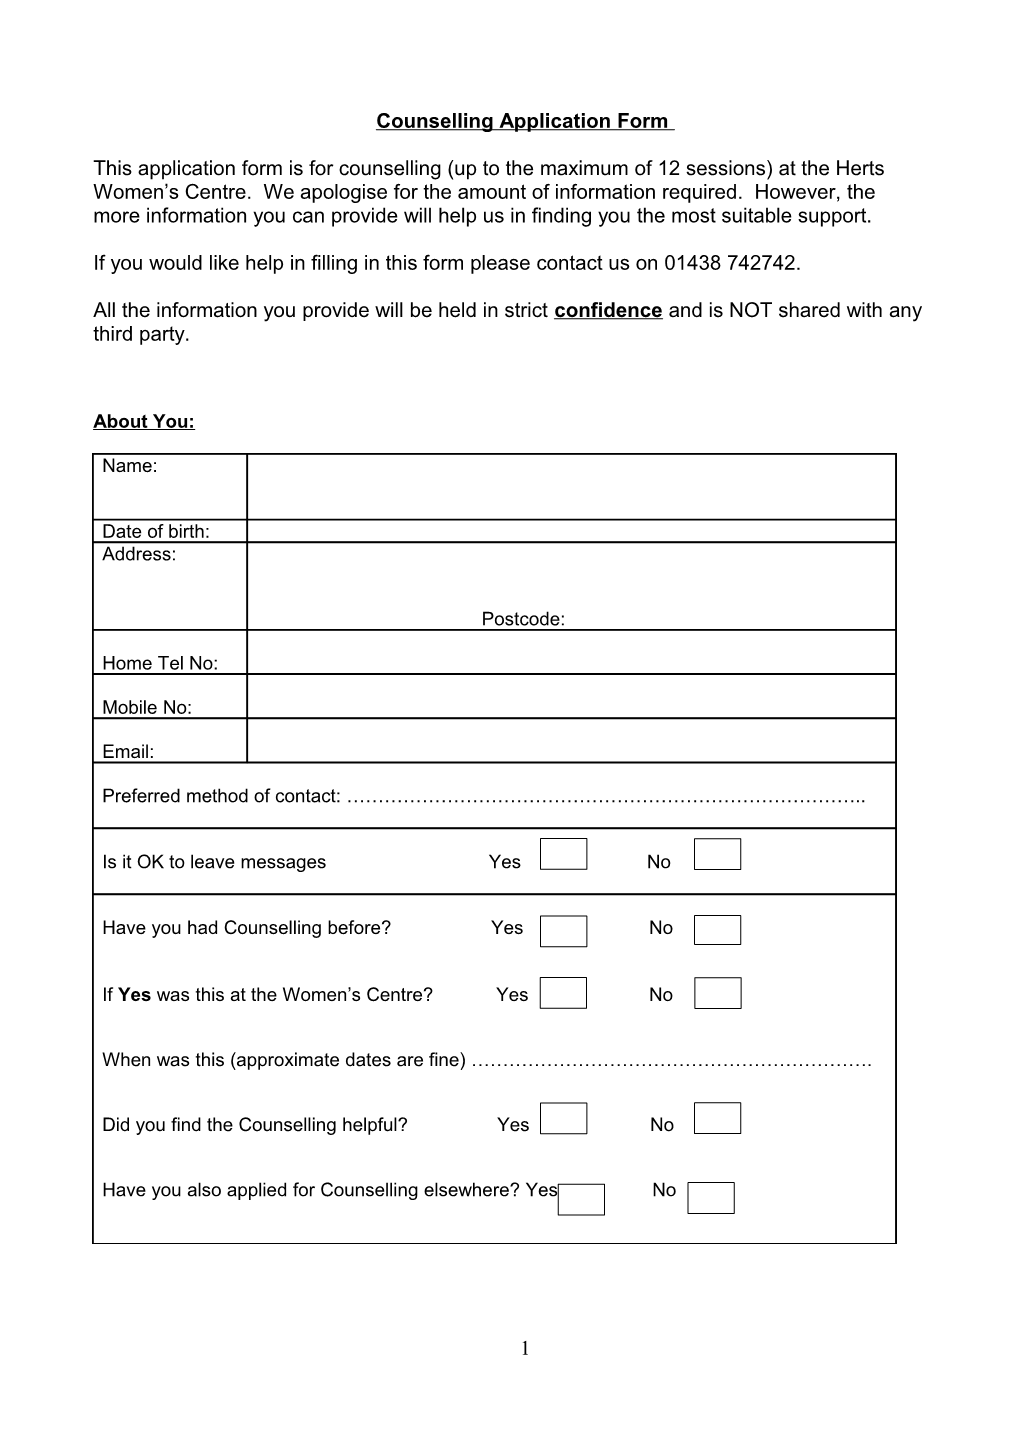 Counselling Application Form Students